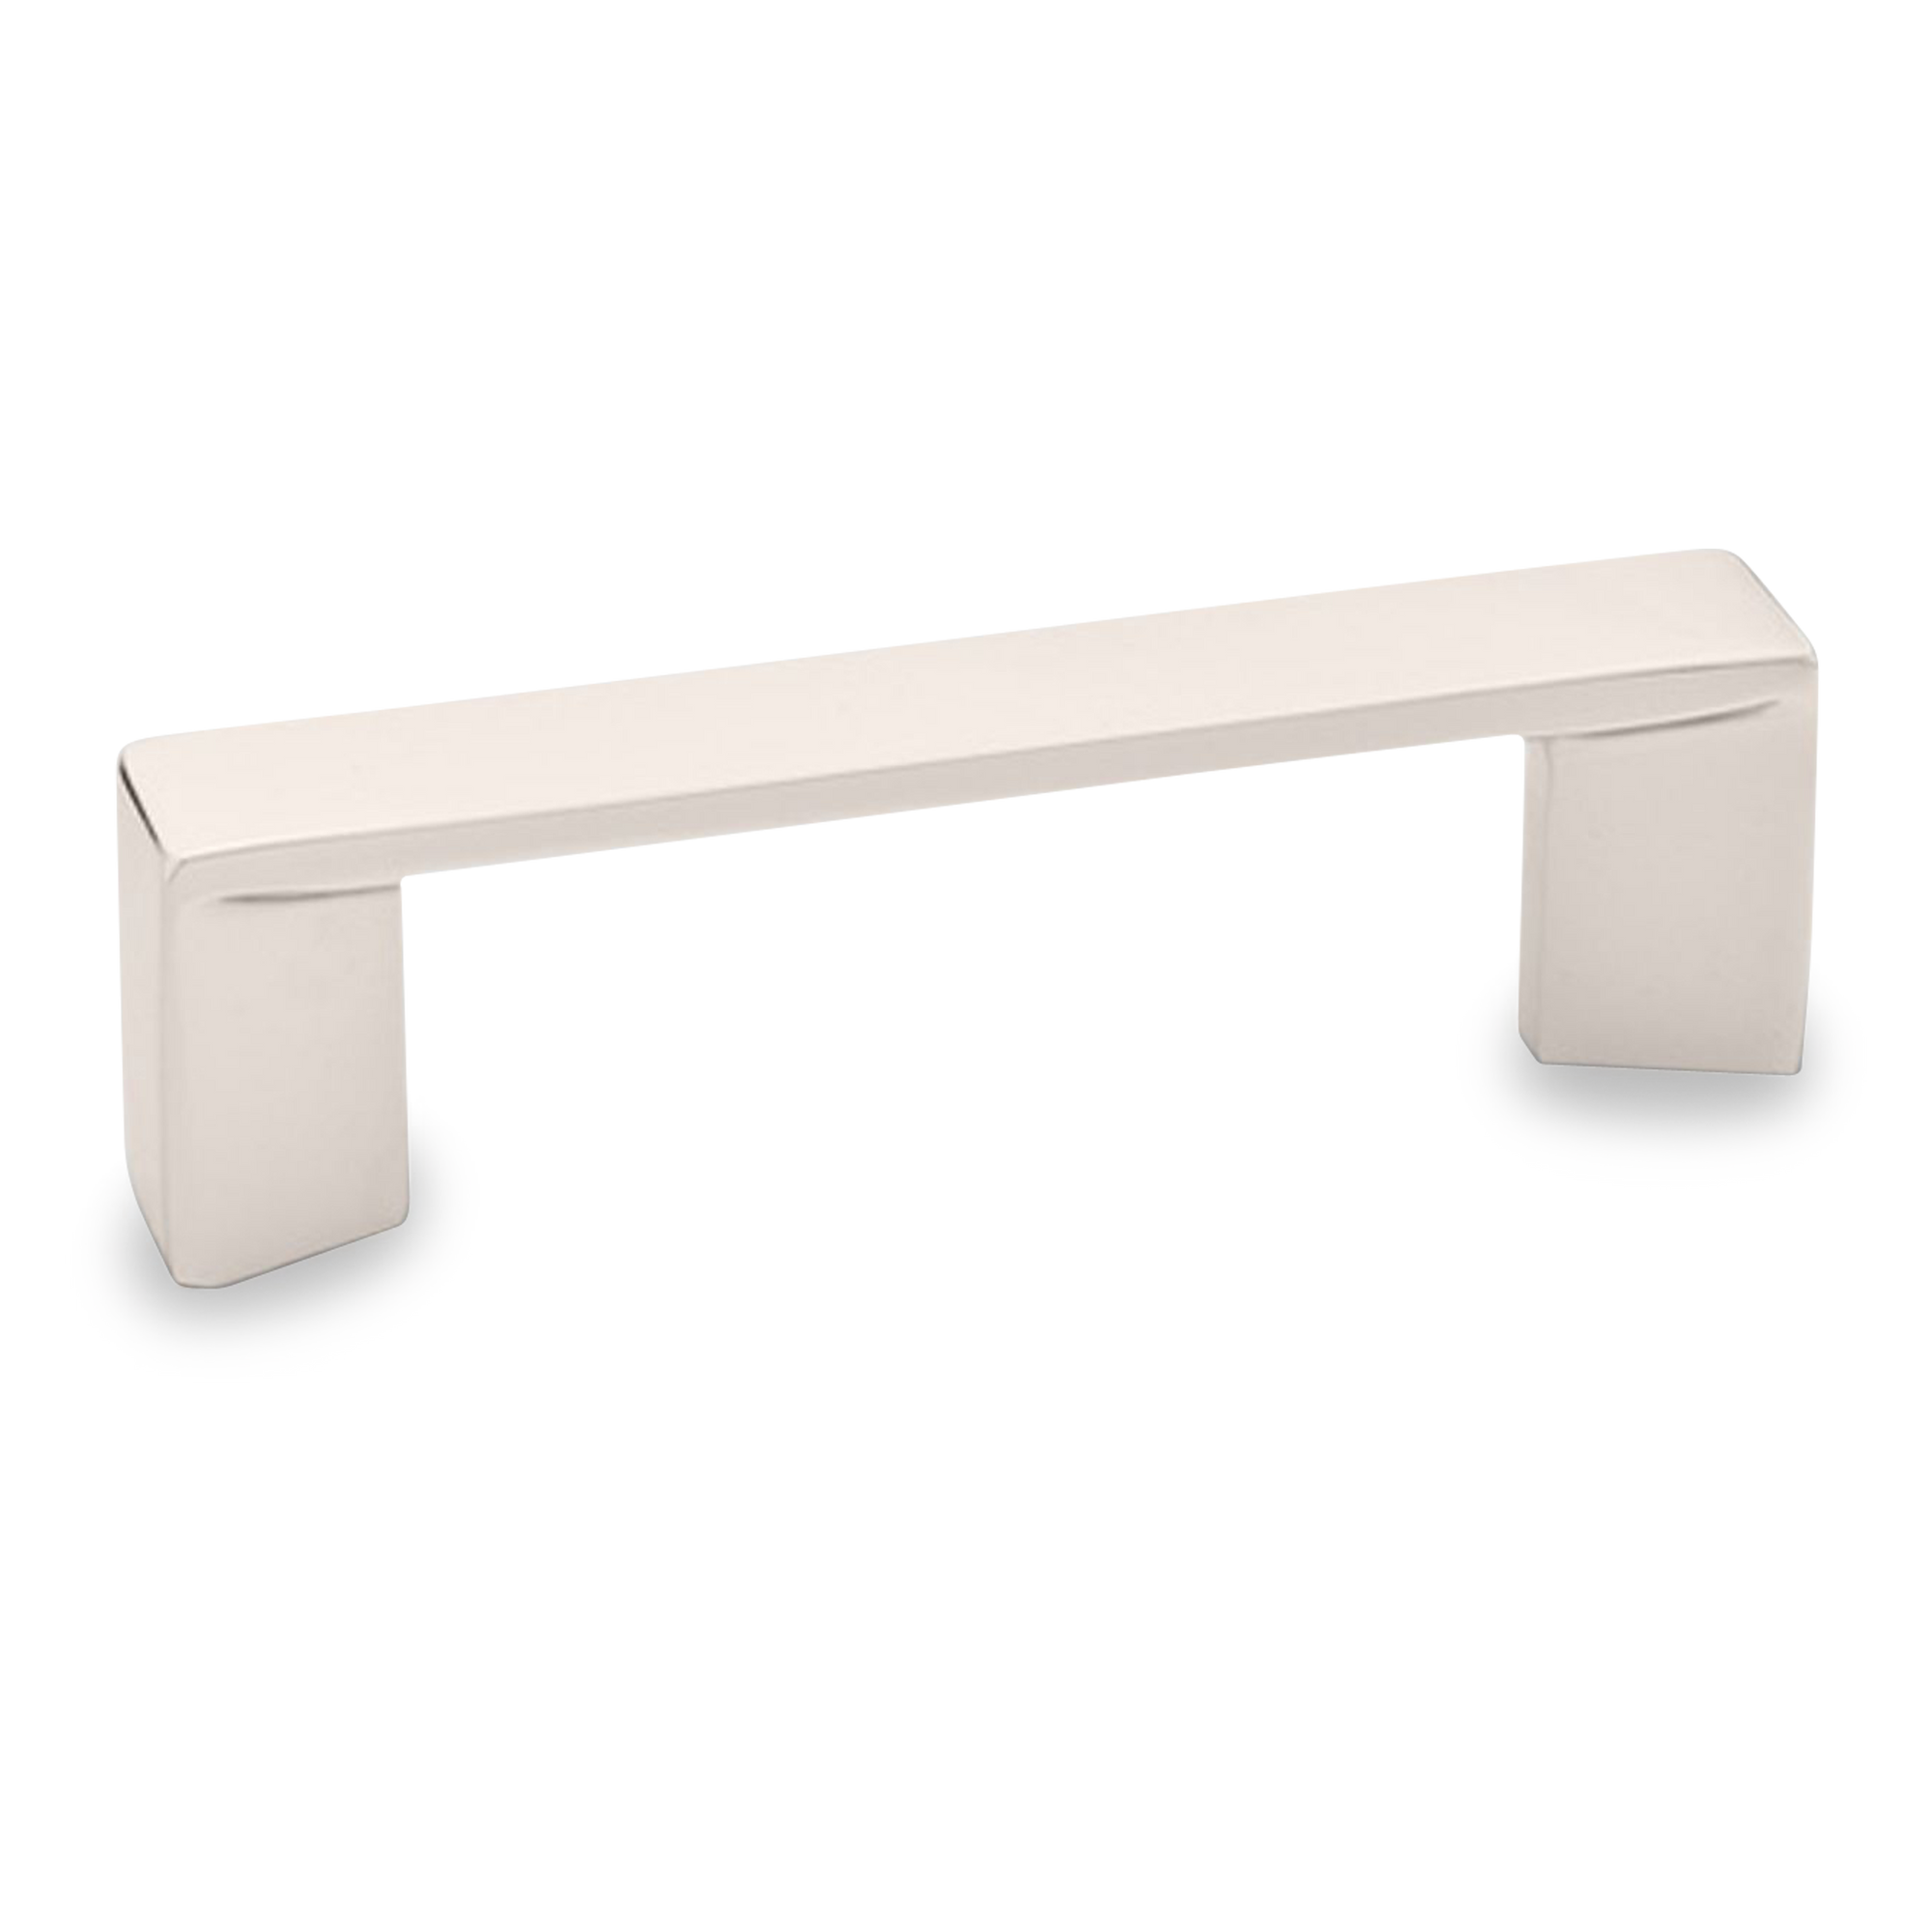 A modern and seamless polished nickel pull with sleek side handle details.